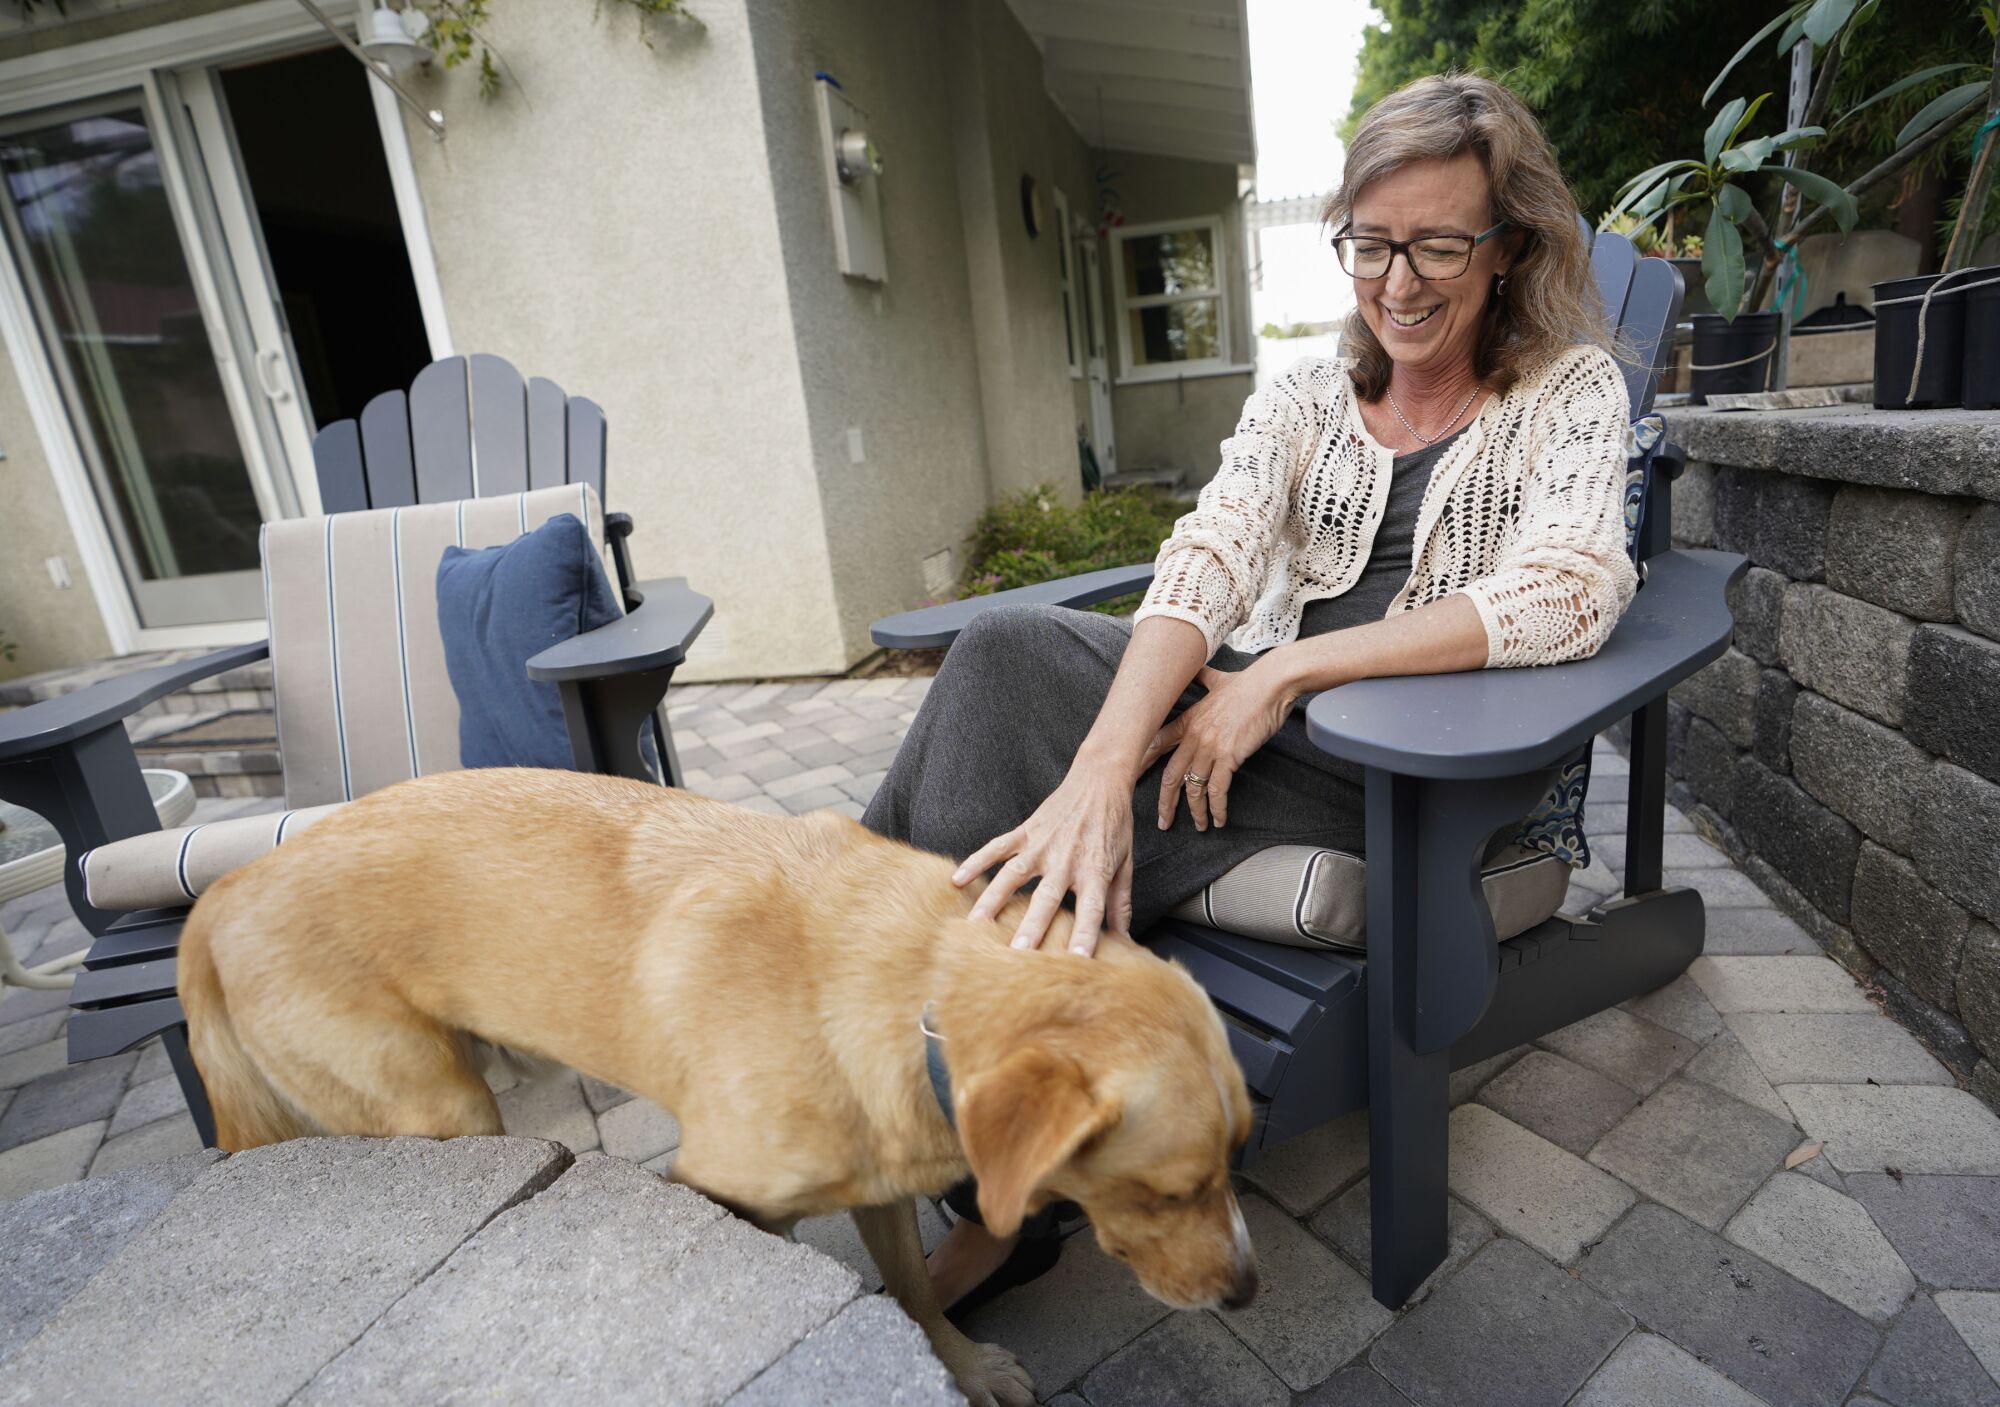 Longtime cancer patient Nancy Davidson with her dog Max in the backyard of her home in Costa Mesa on October 15, 2019.